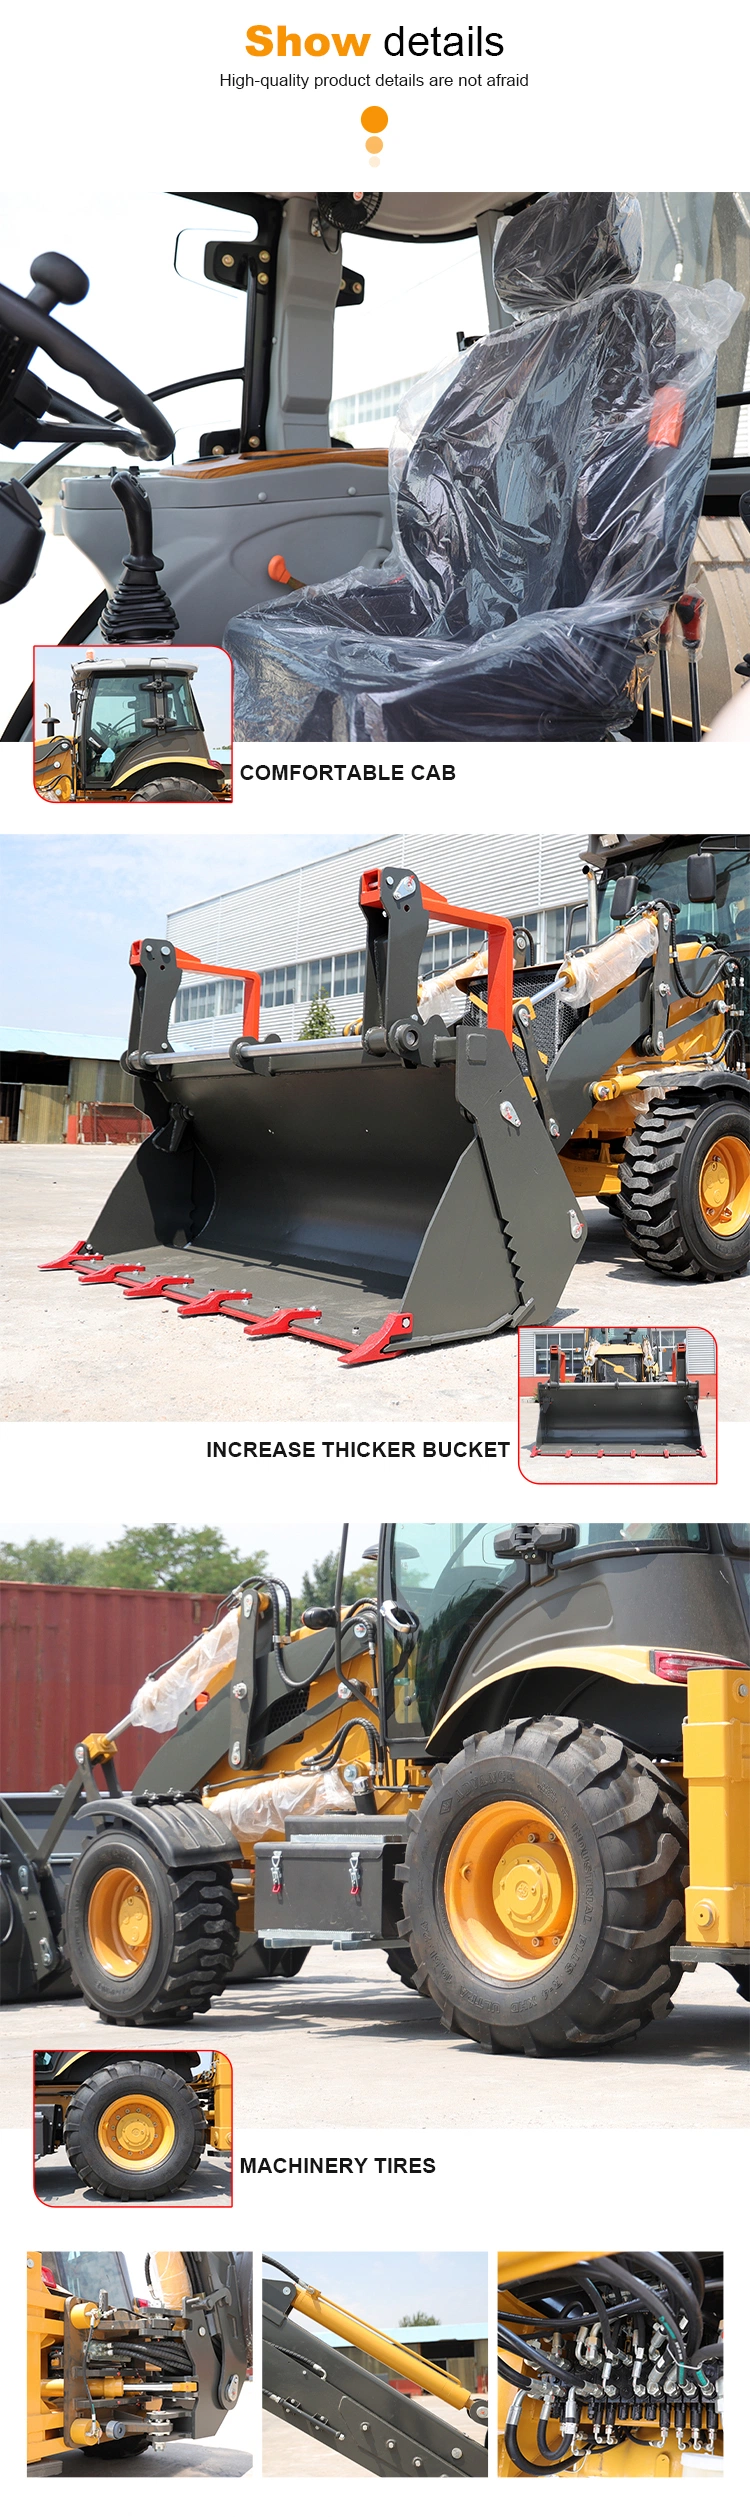 New Agricultural Small Mini Backhoe Loaders Articulated Tractor Backhoe 3ton 4ton 5ton 6ton 7ton 8ton 9ton with Price Wheel Loader Kubota Backhoe